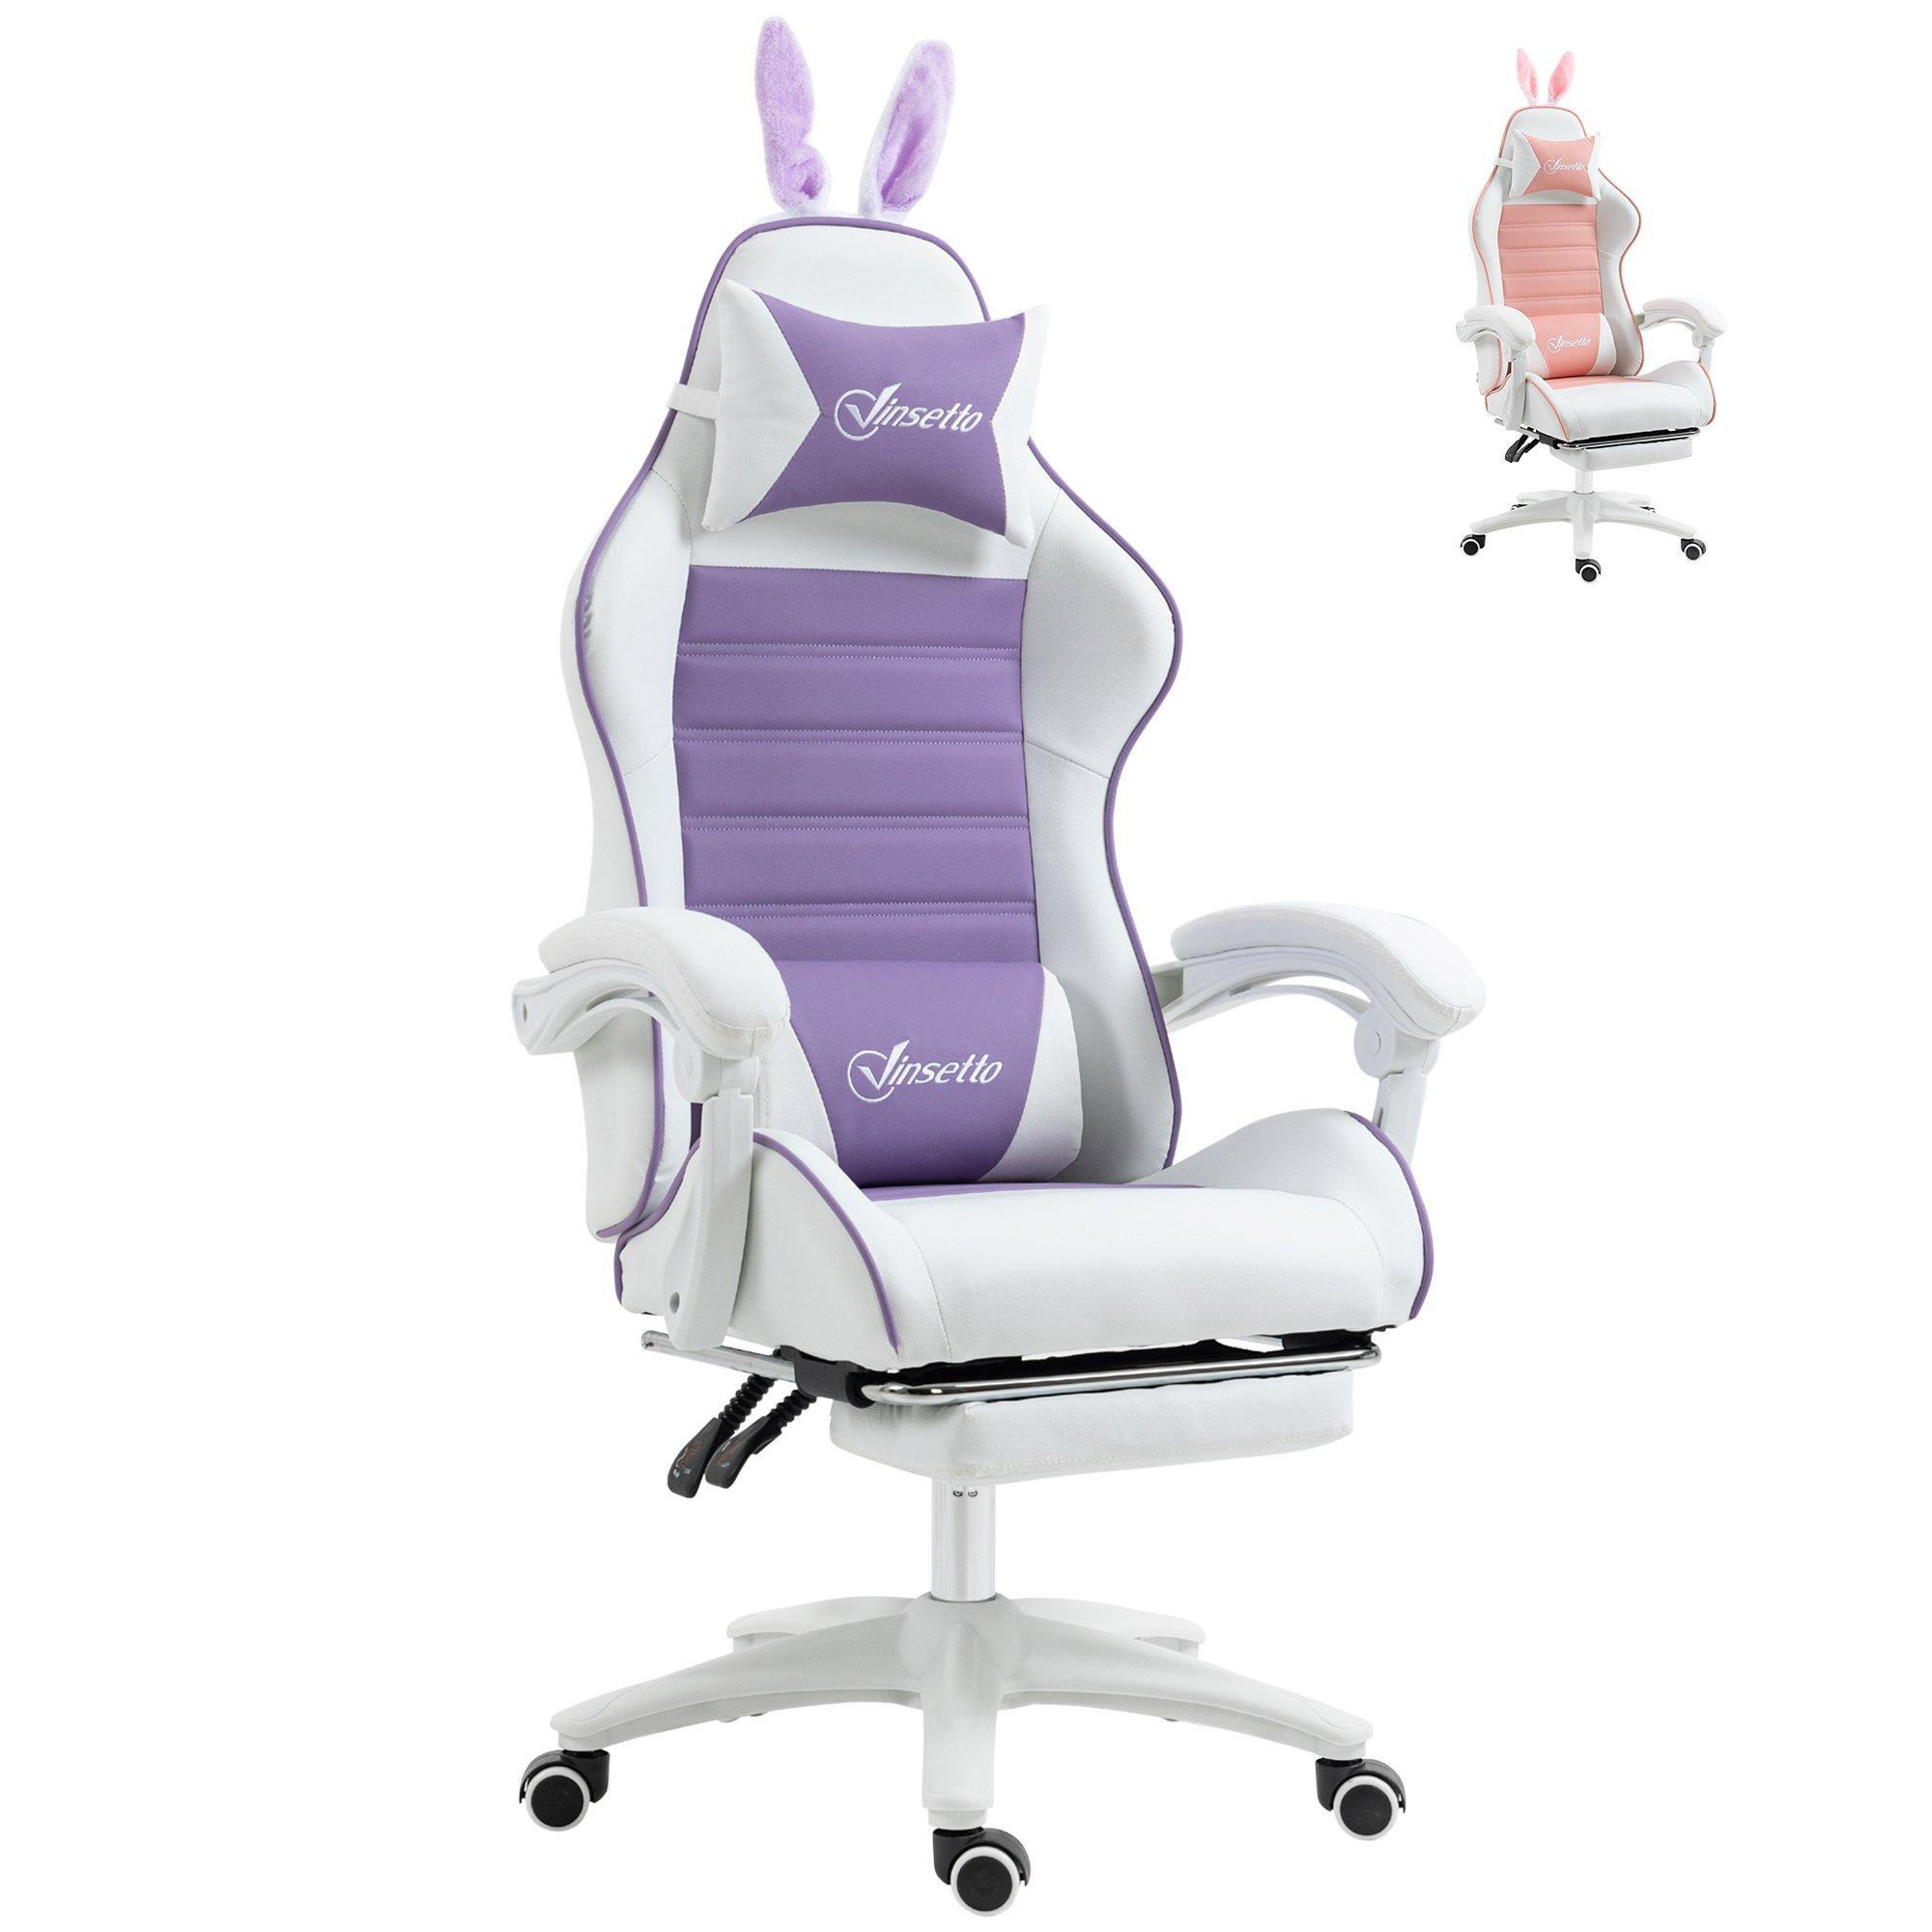 Racing Gaming Chair Reclining PU Leather Computer Chair with Headrest - image 1